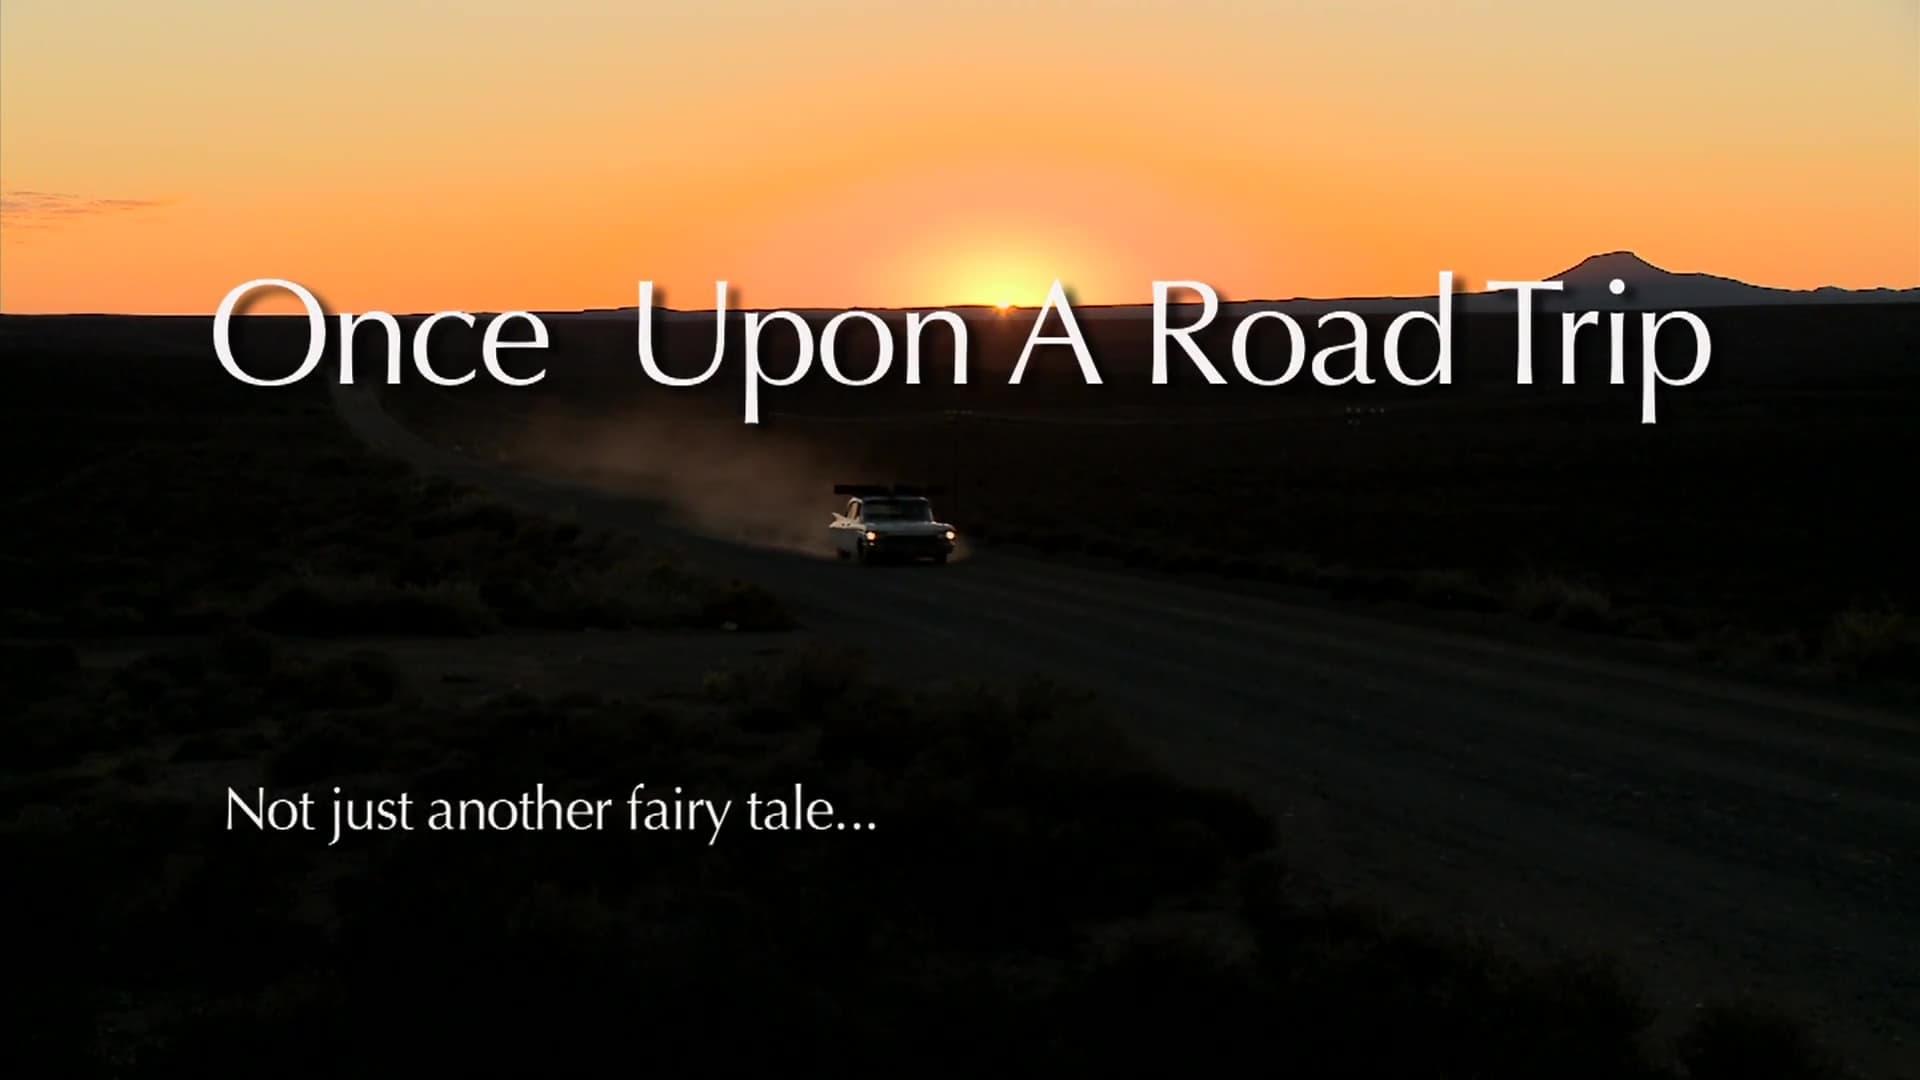 Once Upon a Road Trip backdrop